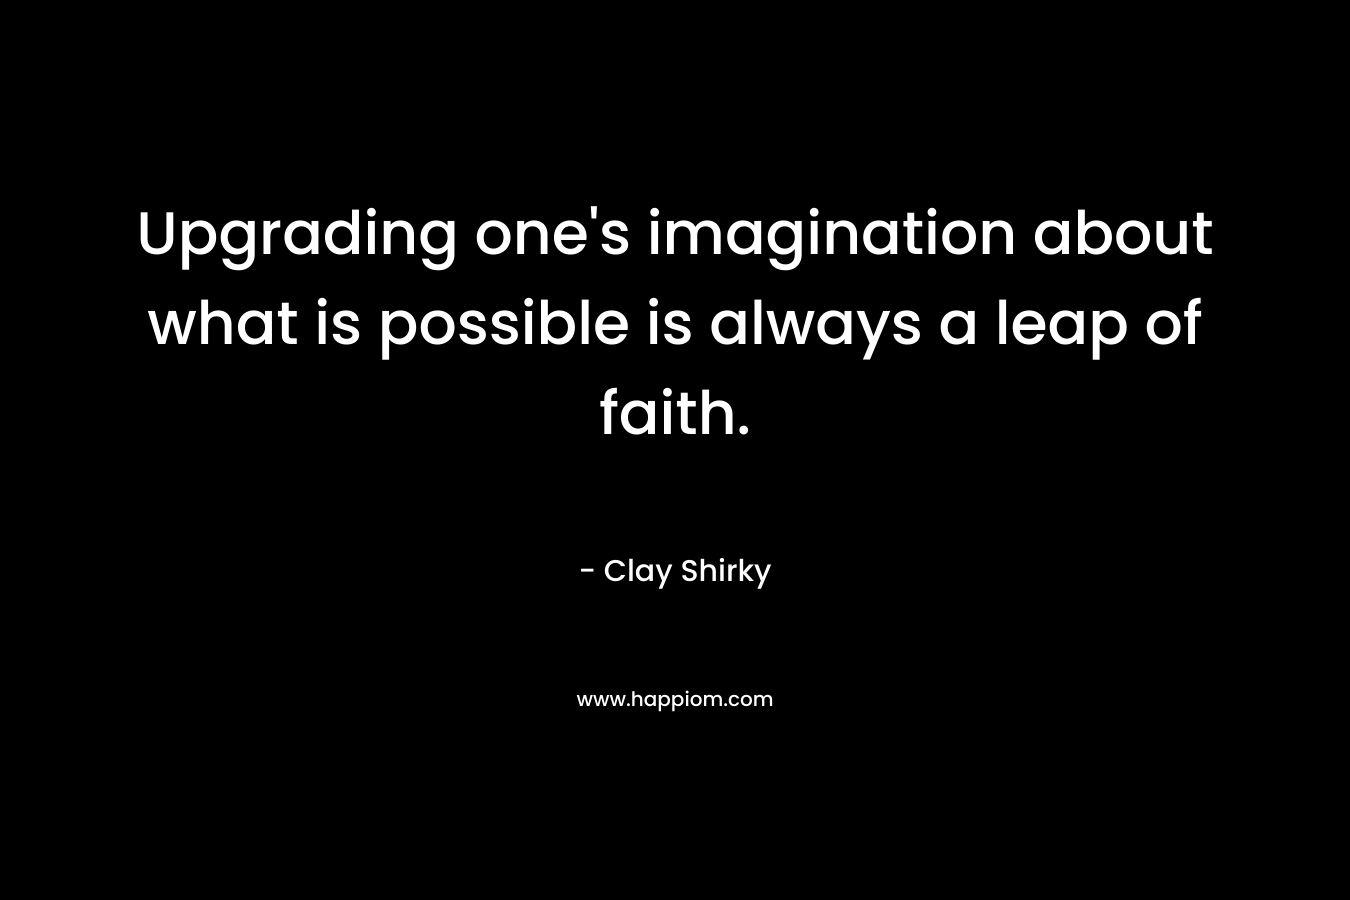 Upgrading one’s imagination about what is possible is always a leap of faith. – Clay Shirky